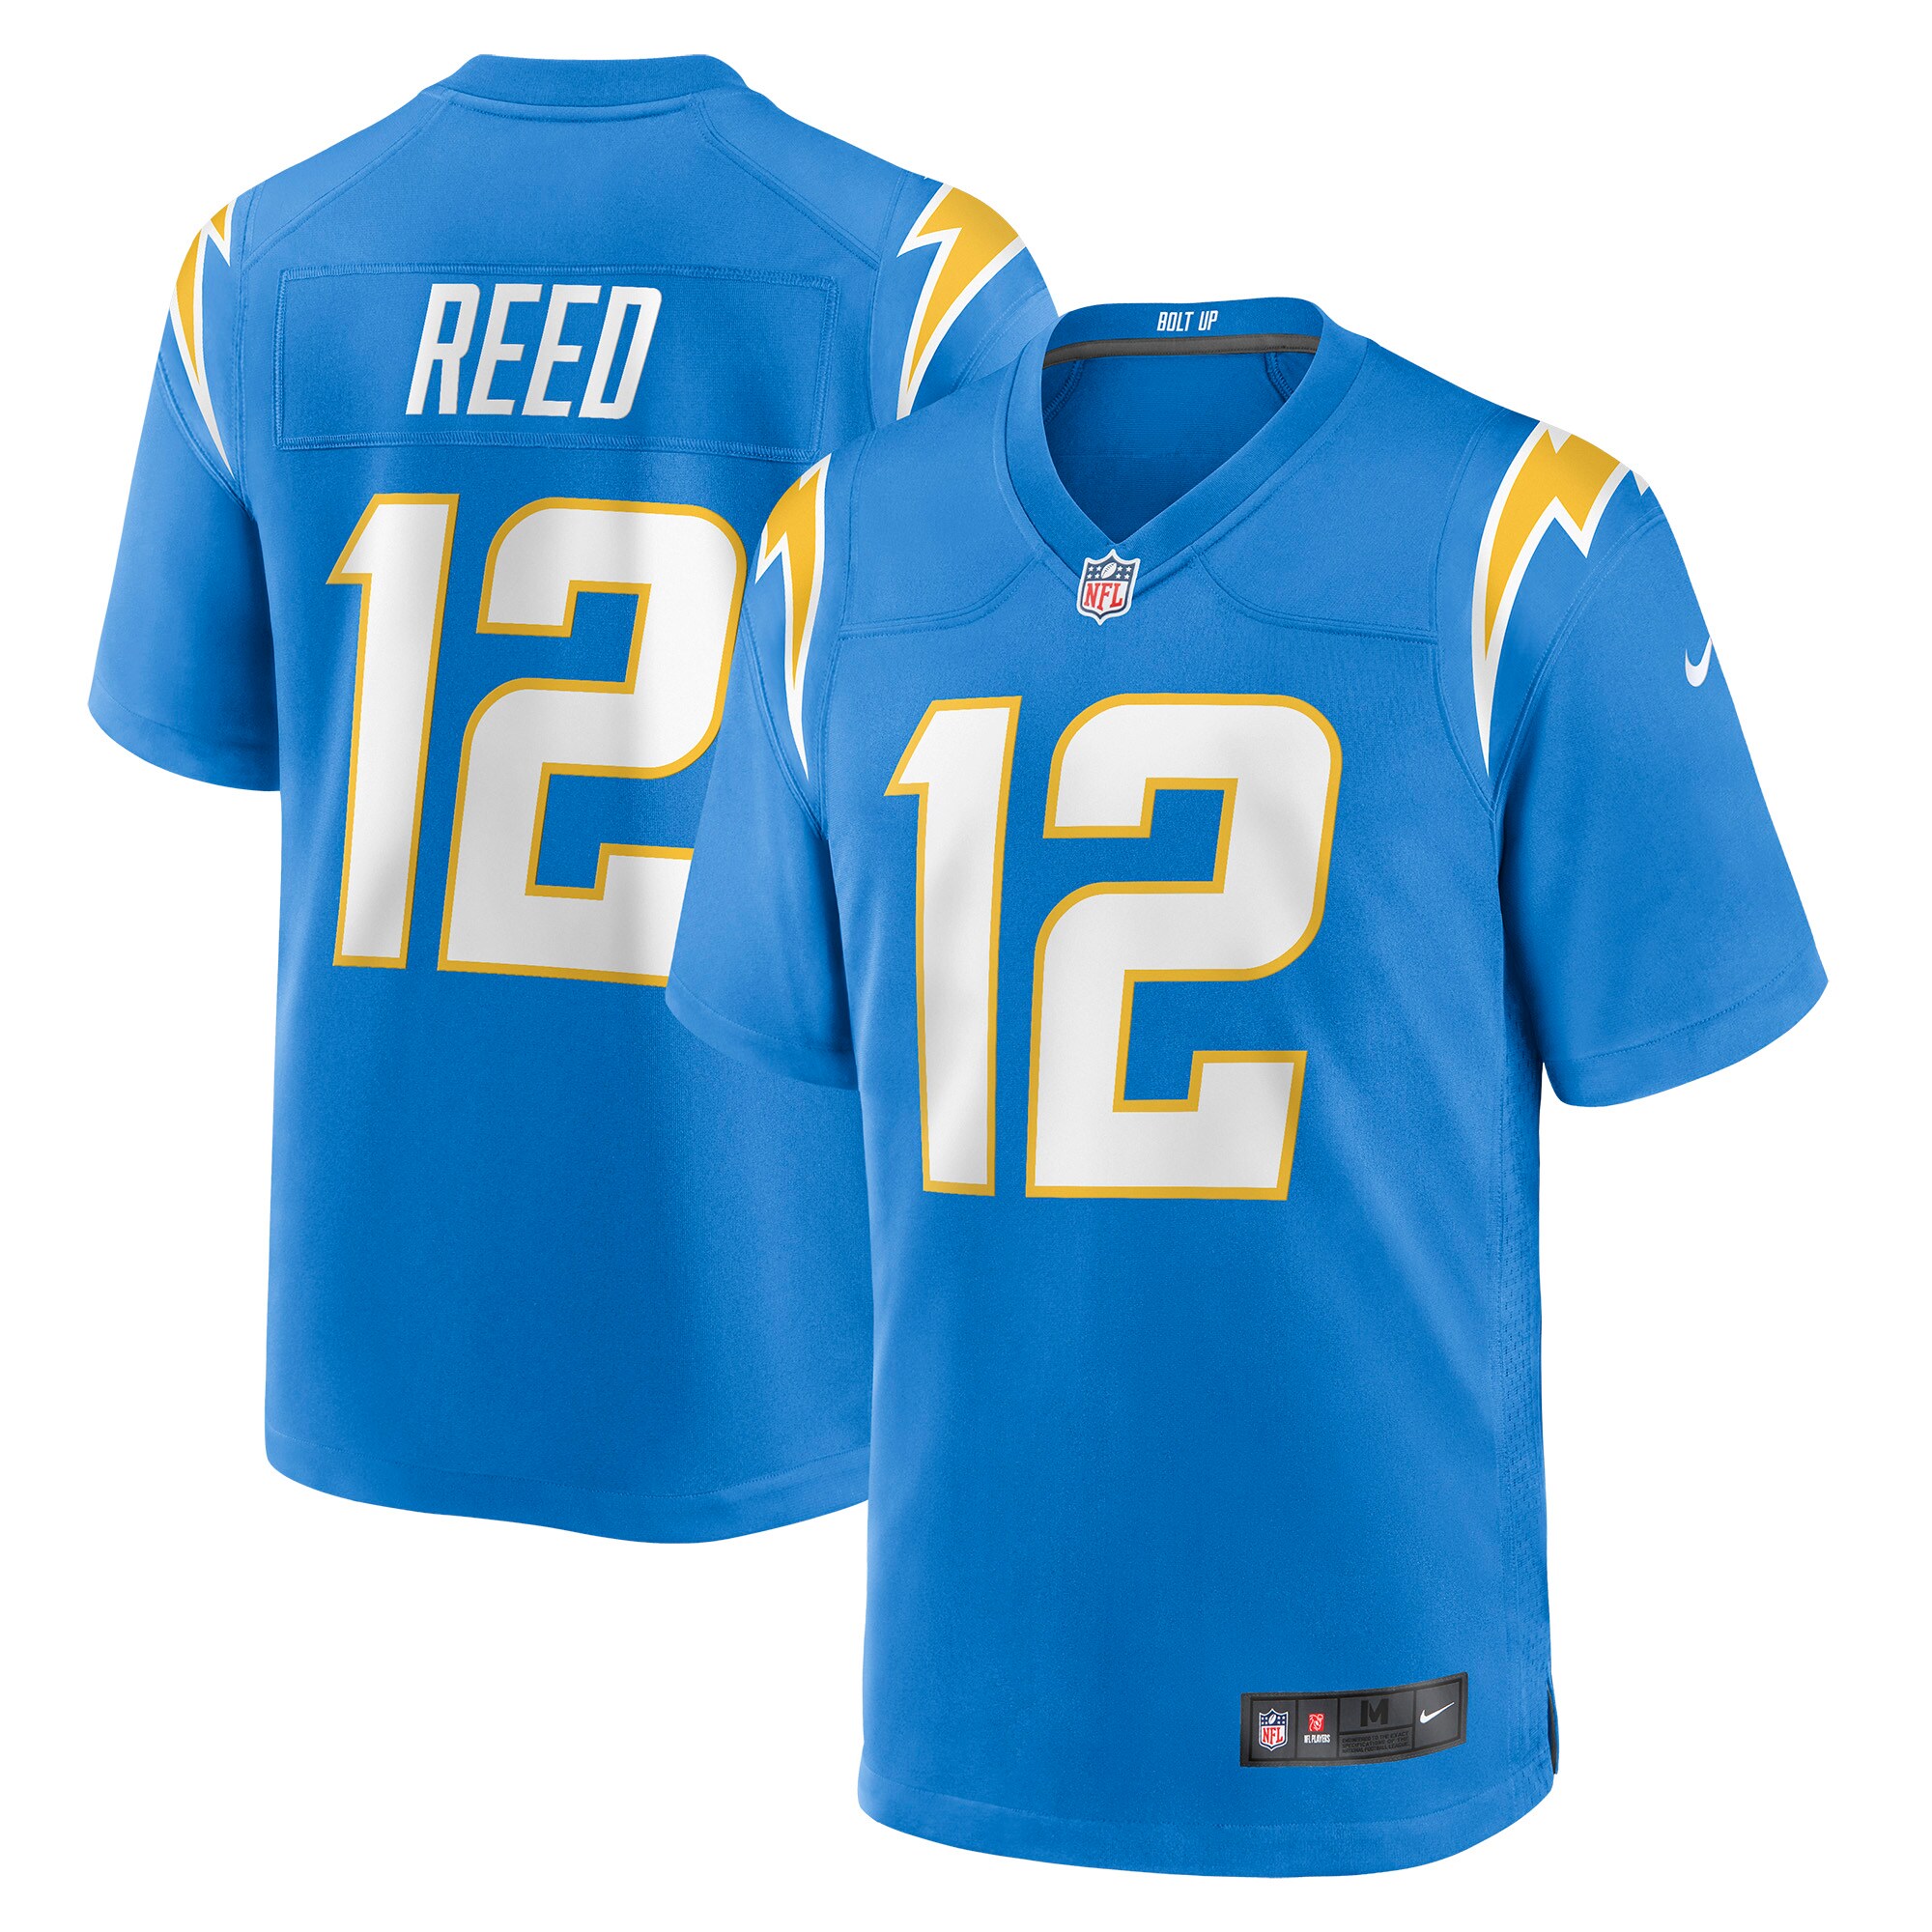 Men's Los Angeles Chargers Jerseys Powder Blue Joe Reed Game Style